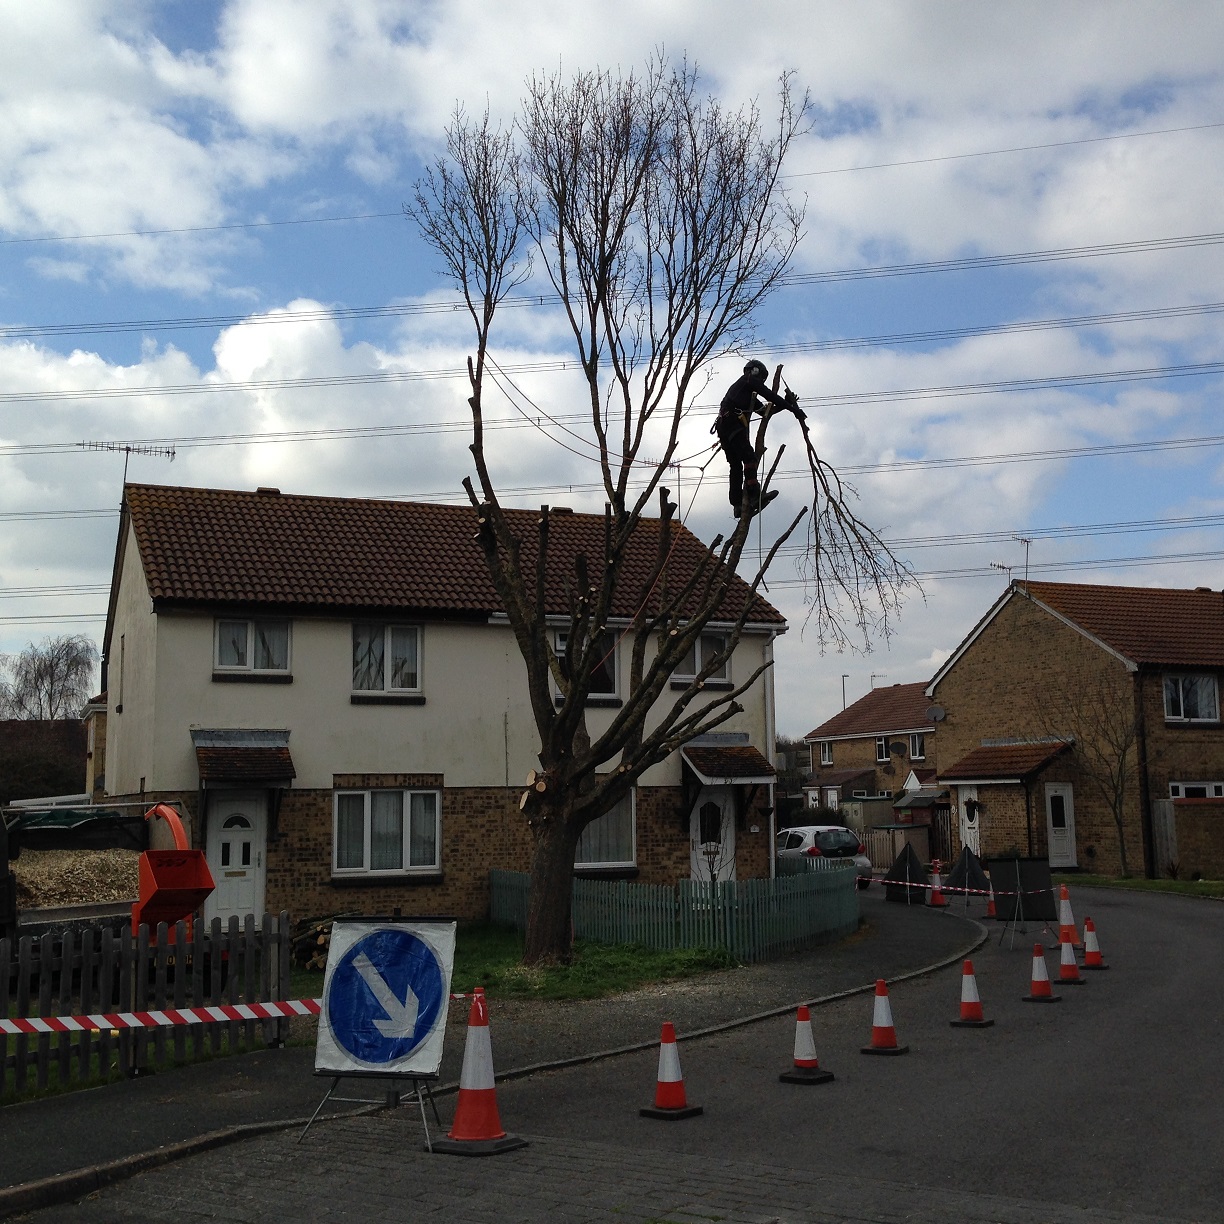 Weymouth tree pruning services - tree surgeon carrying a tree removal in Weymouth, Dorset